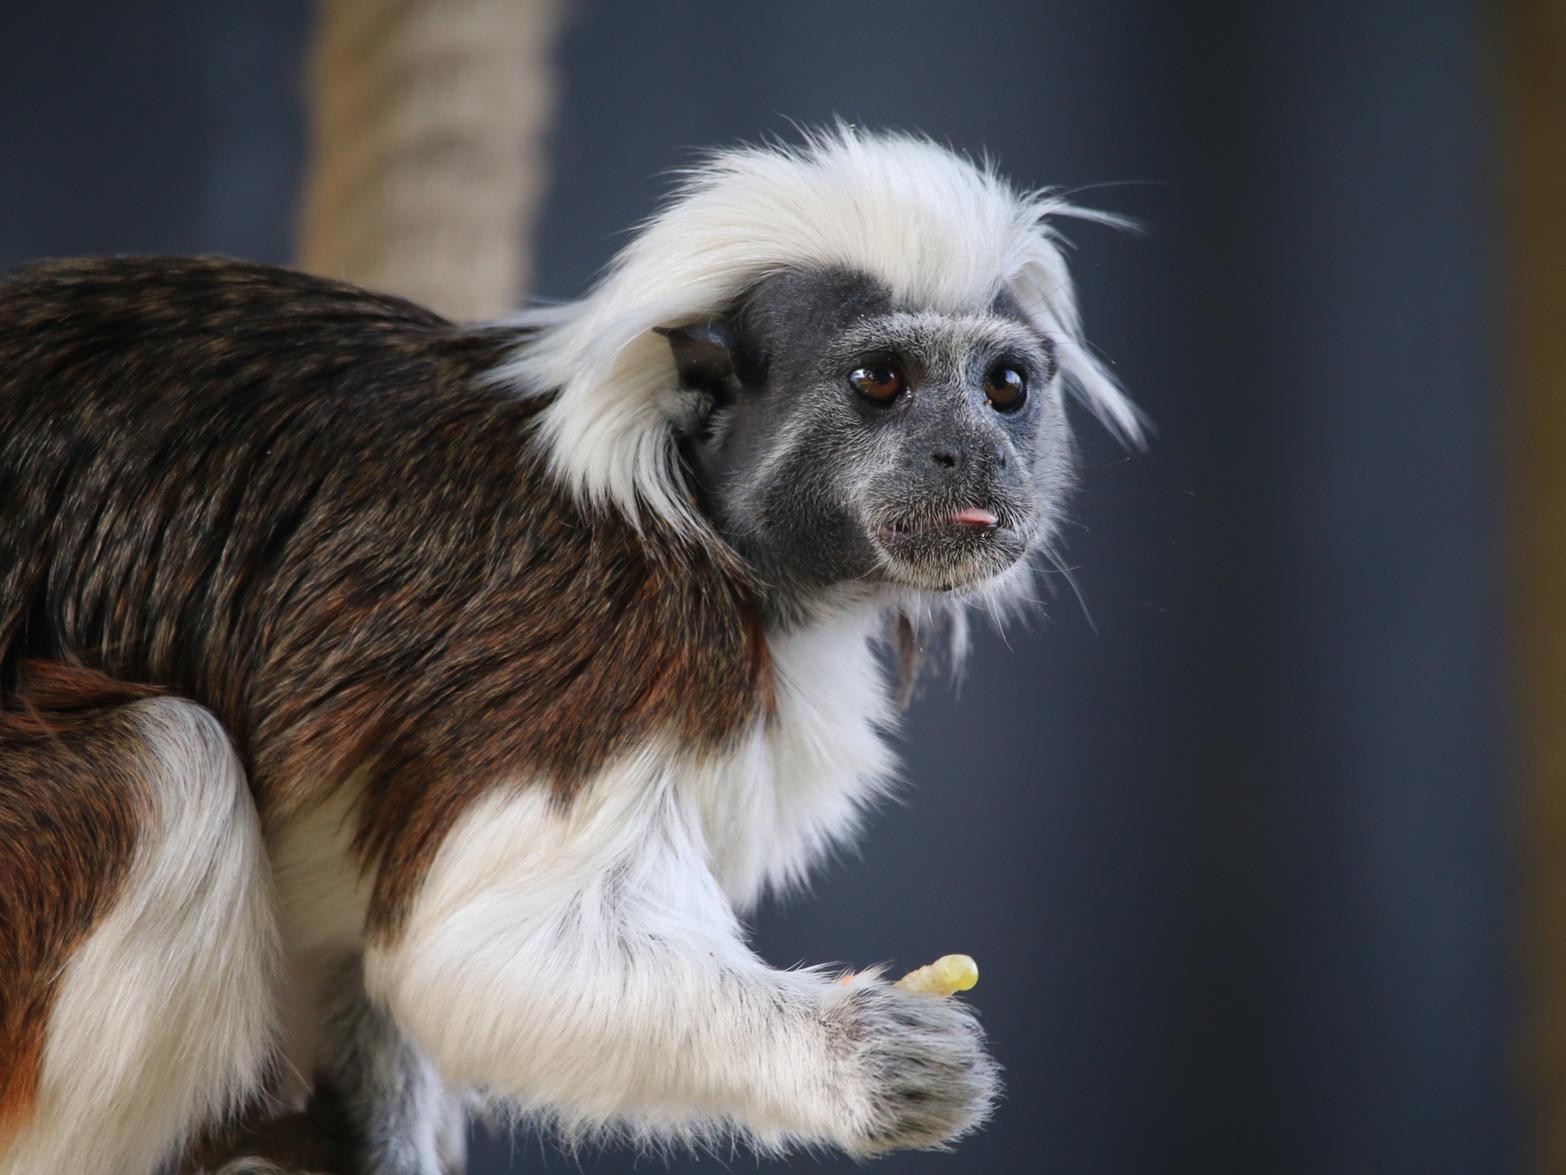 In July, a pair of rare Cotton Top Tamarins joined the park. Maurice and Margot, aged 2, are part of the international breeding programme. There are currently only believed to be just over 6,000 of the species left in the wild.